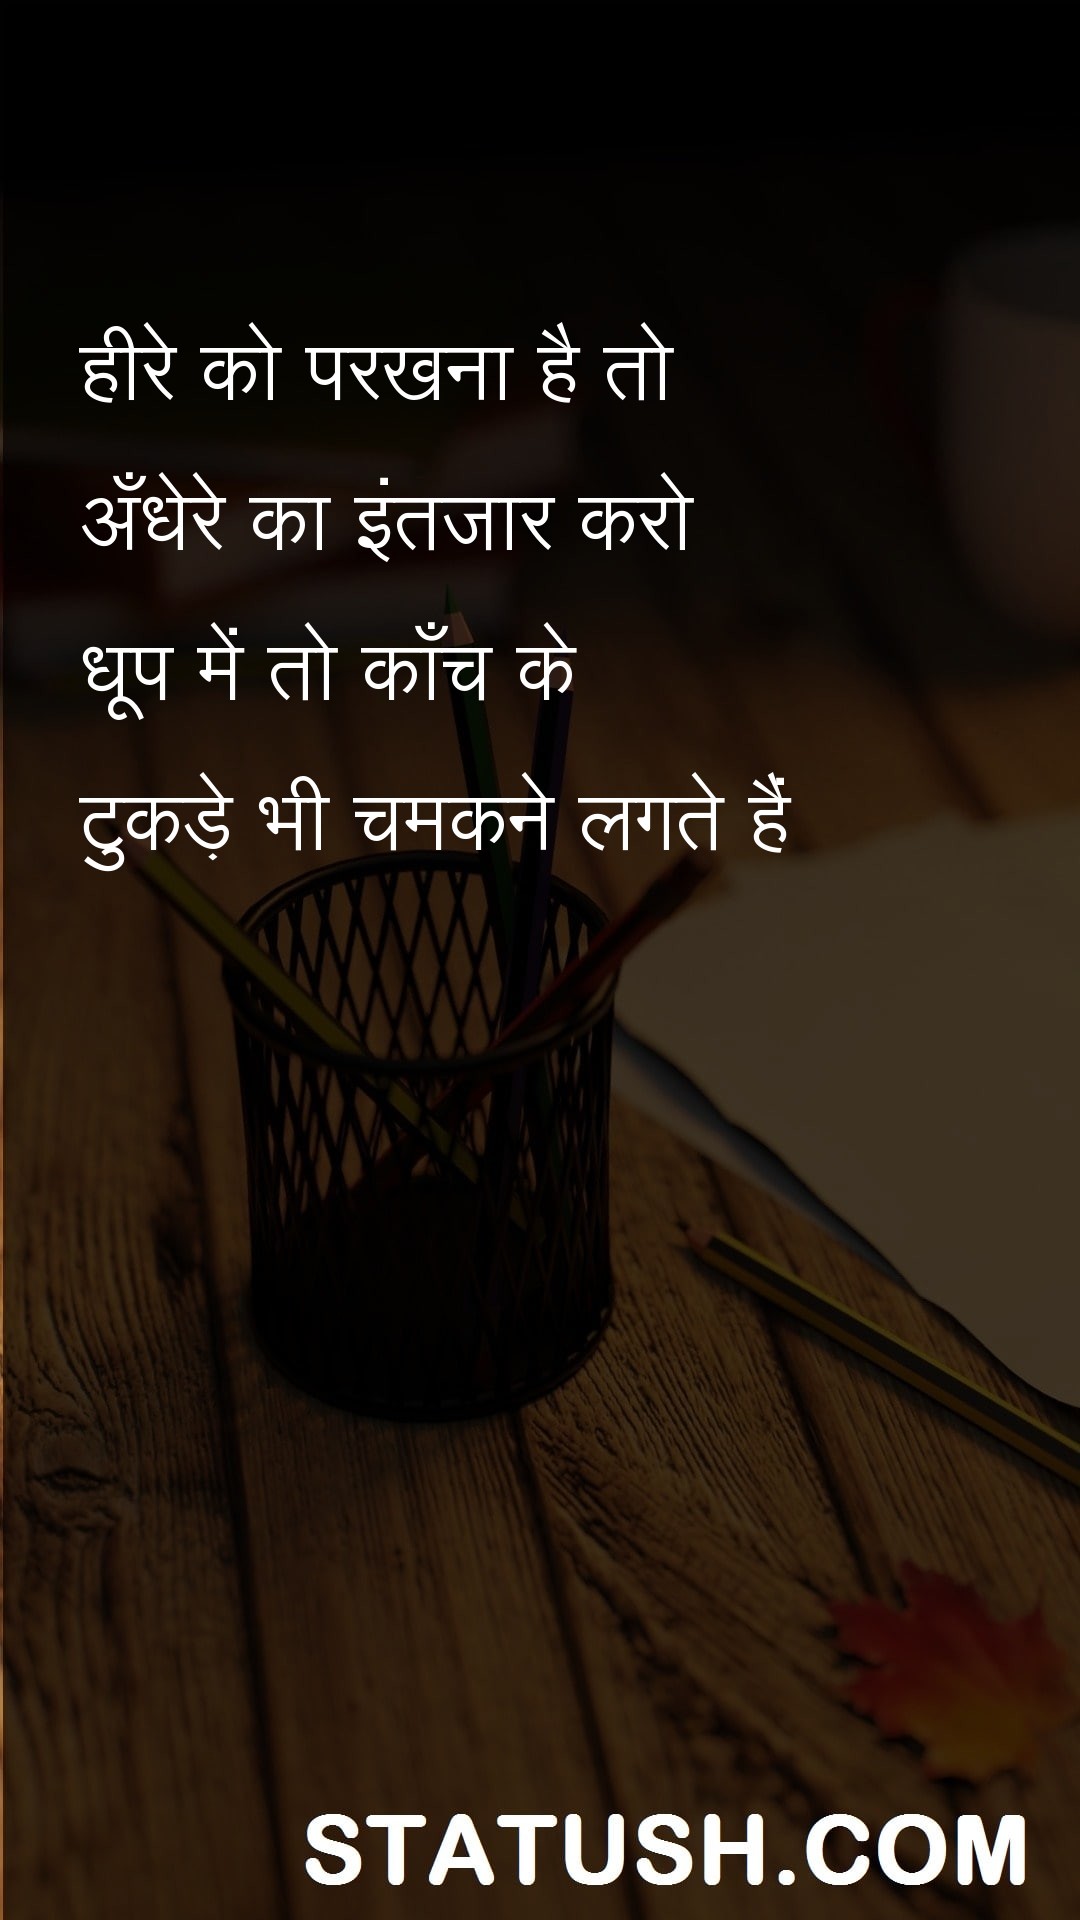 If you want to test the diamond - Hindi Quotes at statush.com